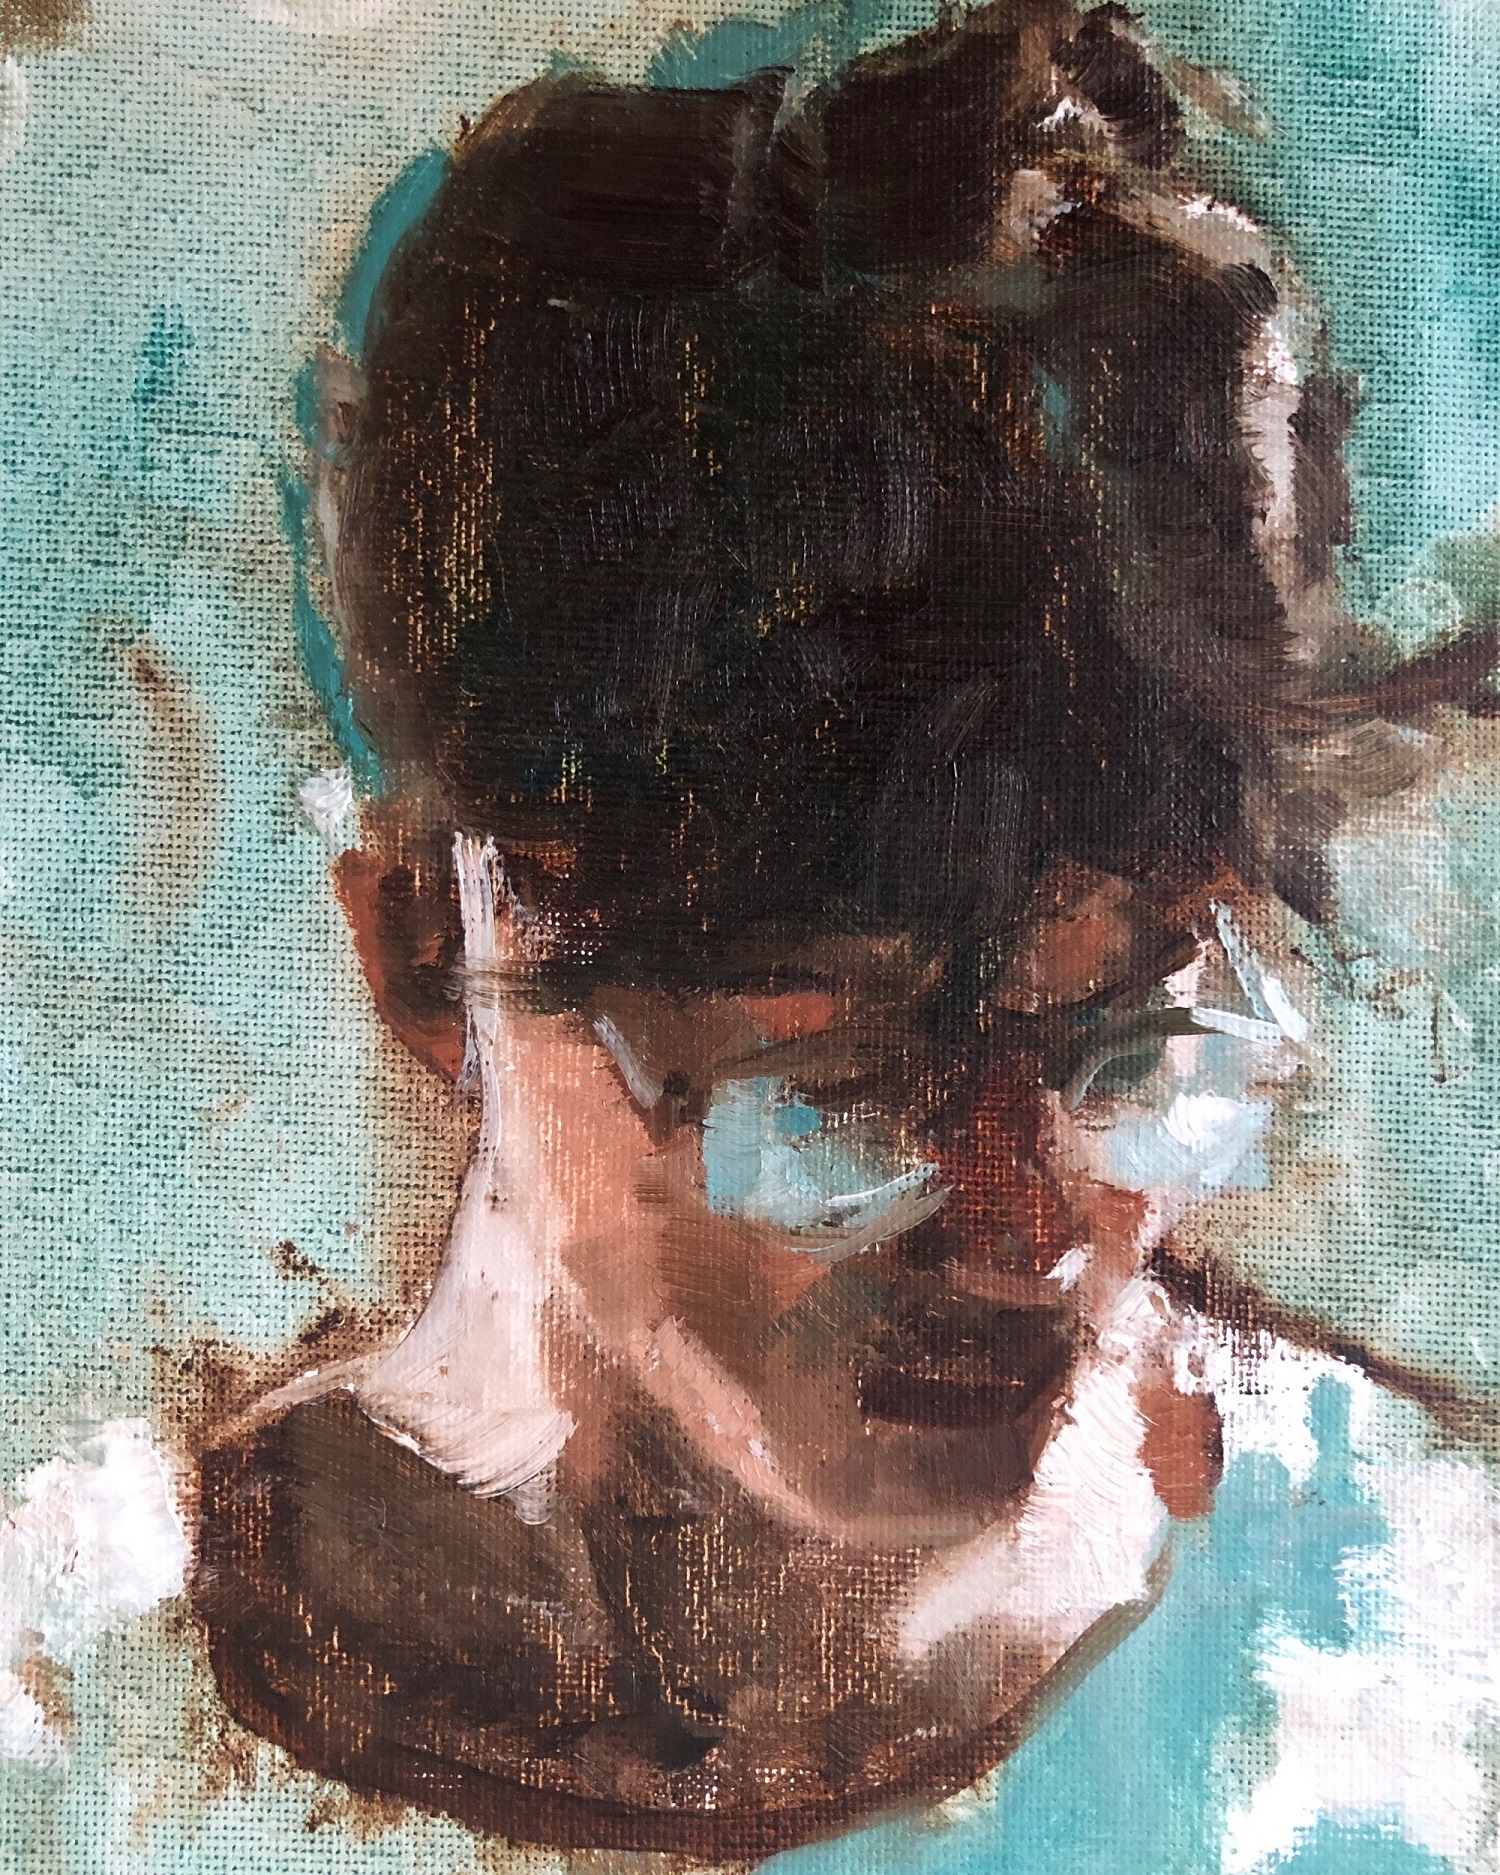 Man Looking Down (Ian Chang), 2019 Jonathan Chan Oil on canvas, 8 x 6 in